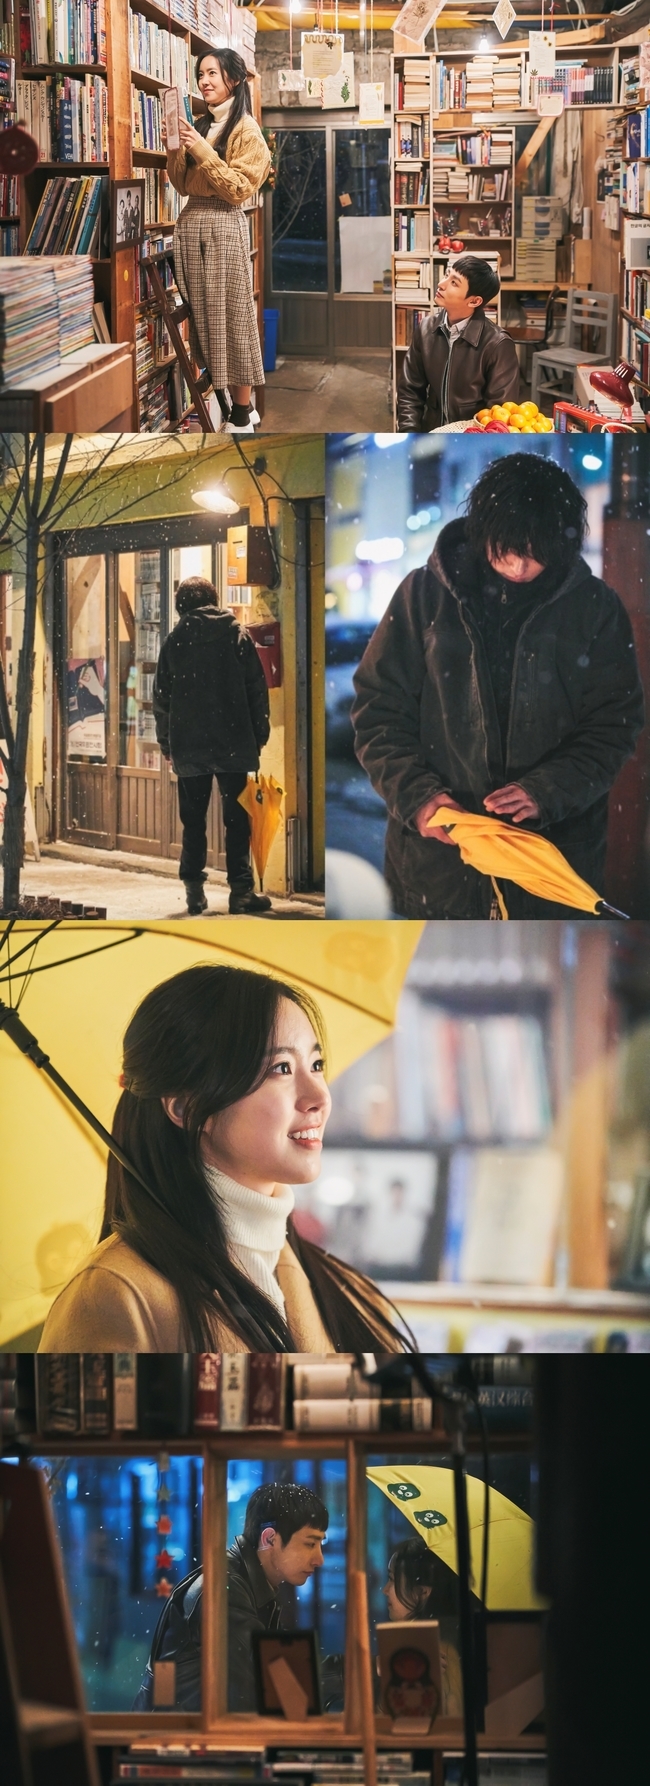 Bone Again will reveal a previous life story from the 1980s.KBS 2TV New Moonwha drama Bourne Again (playplay by Jung Su-mi/director Jin Hyung-wook/Produced UFO Productions, Monster Union) unveiled the meeting of three people in their previous lives in the 1980s.It contains the image of Jeong Ha-eun (Jin Se-yeon), who is having a friendly time in the old bookstore Old Future in the picture of analog sensibility in the 1980s, and the detective Cha Hyung-bin (Lee Soo-hyuk), who kept the love story for her.On the ladder, Jung Ha-eun found the book The Hill of the Storm on a filled bookcase, and Cha Hyung-bin is sending a sweet eye to her without a moments eyes.There is a loneliness in the back of the public figure looking at the two people outside the door.The eyes on his head do not care, but he touches only the yellow umbrella that he held in his hand as if he was precious, and it stimulates curiosity about what story is there.Especially, Jung Ha-eun, who wears a yellow umbrella that looks like the same as he was holding, catches her and smiles brightly while facing Cha Hyung-bin, contrasts with the lonely atmosphere of Gong Ji-cheol standing in the same place.Among the images of the present age that were previously revealed, it is felt as a strange deja vu because it contains similar compositions of Chun Jong-beom (Jang Ki-yong), Jin Se-yeon and Lee Soo-hyuk who passed by in front of a snowy bookstore.Yellow umbrellas also appear in teaser posters, which raises more questions about what they mean.Park Su-in